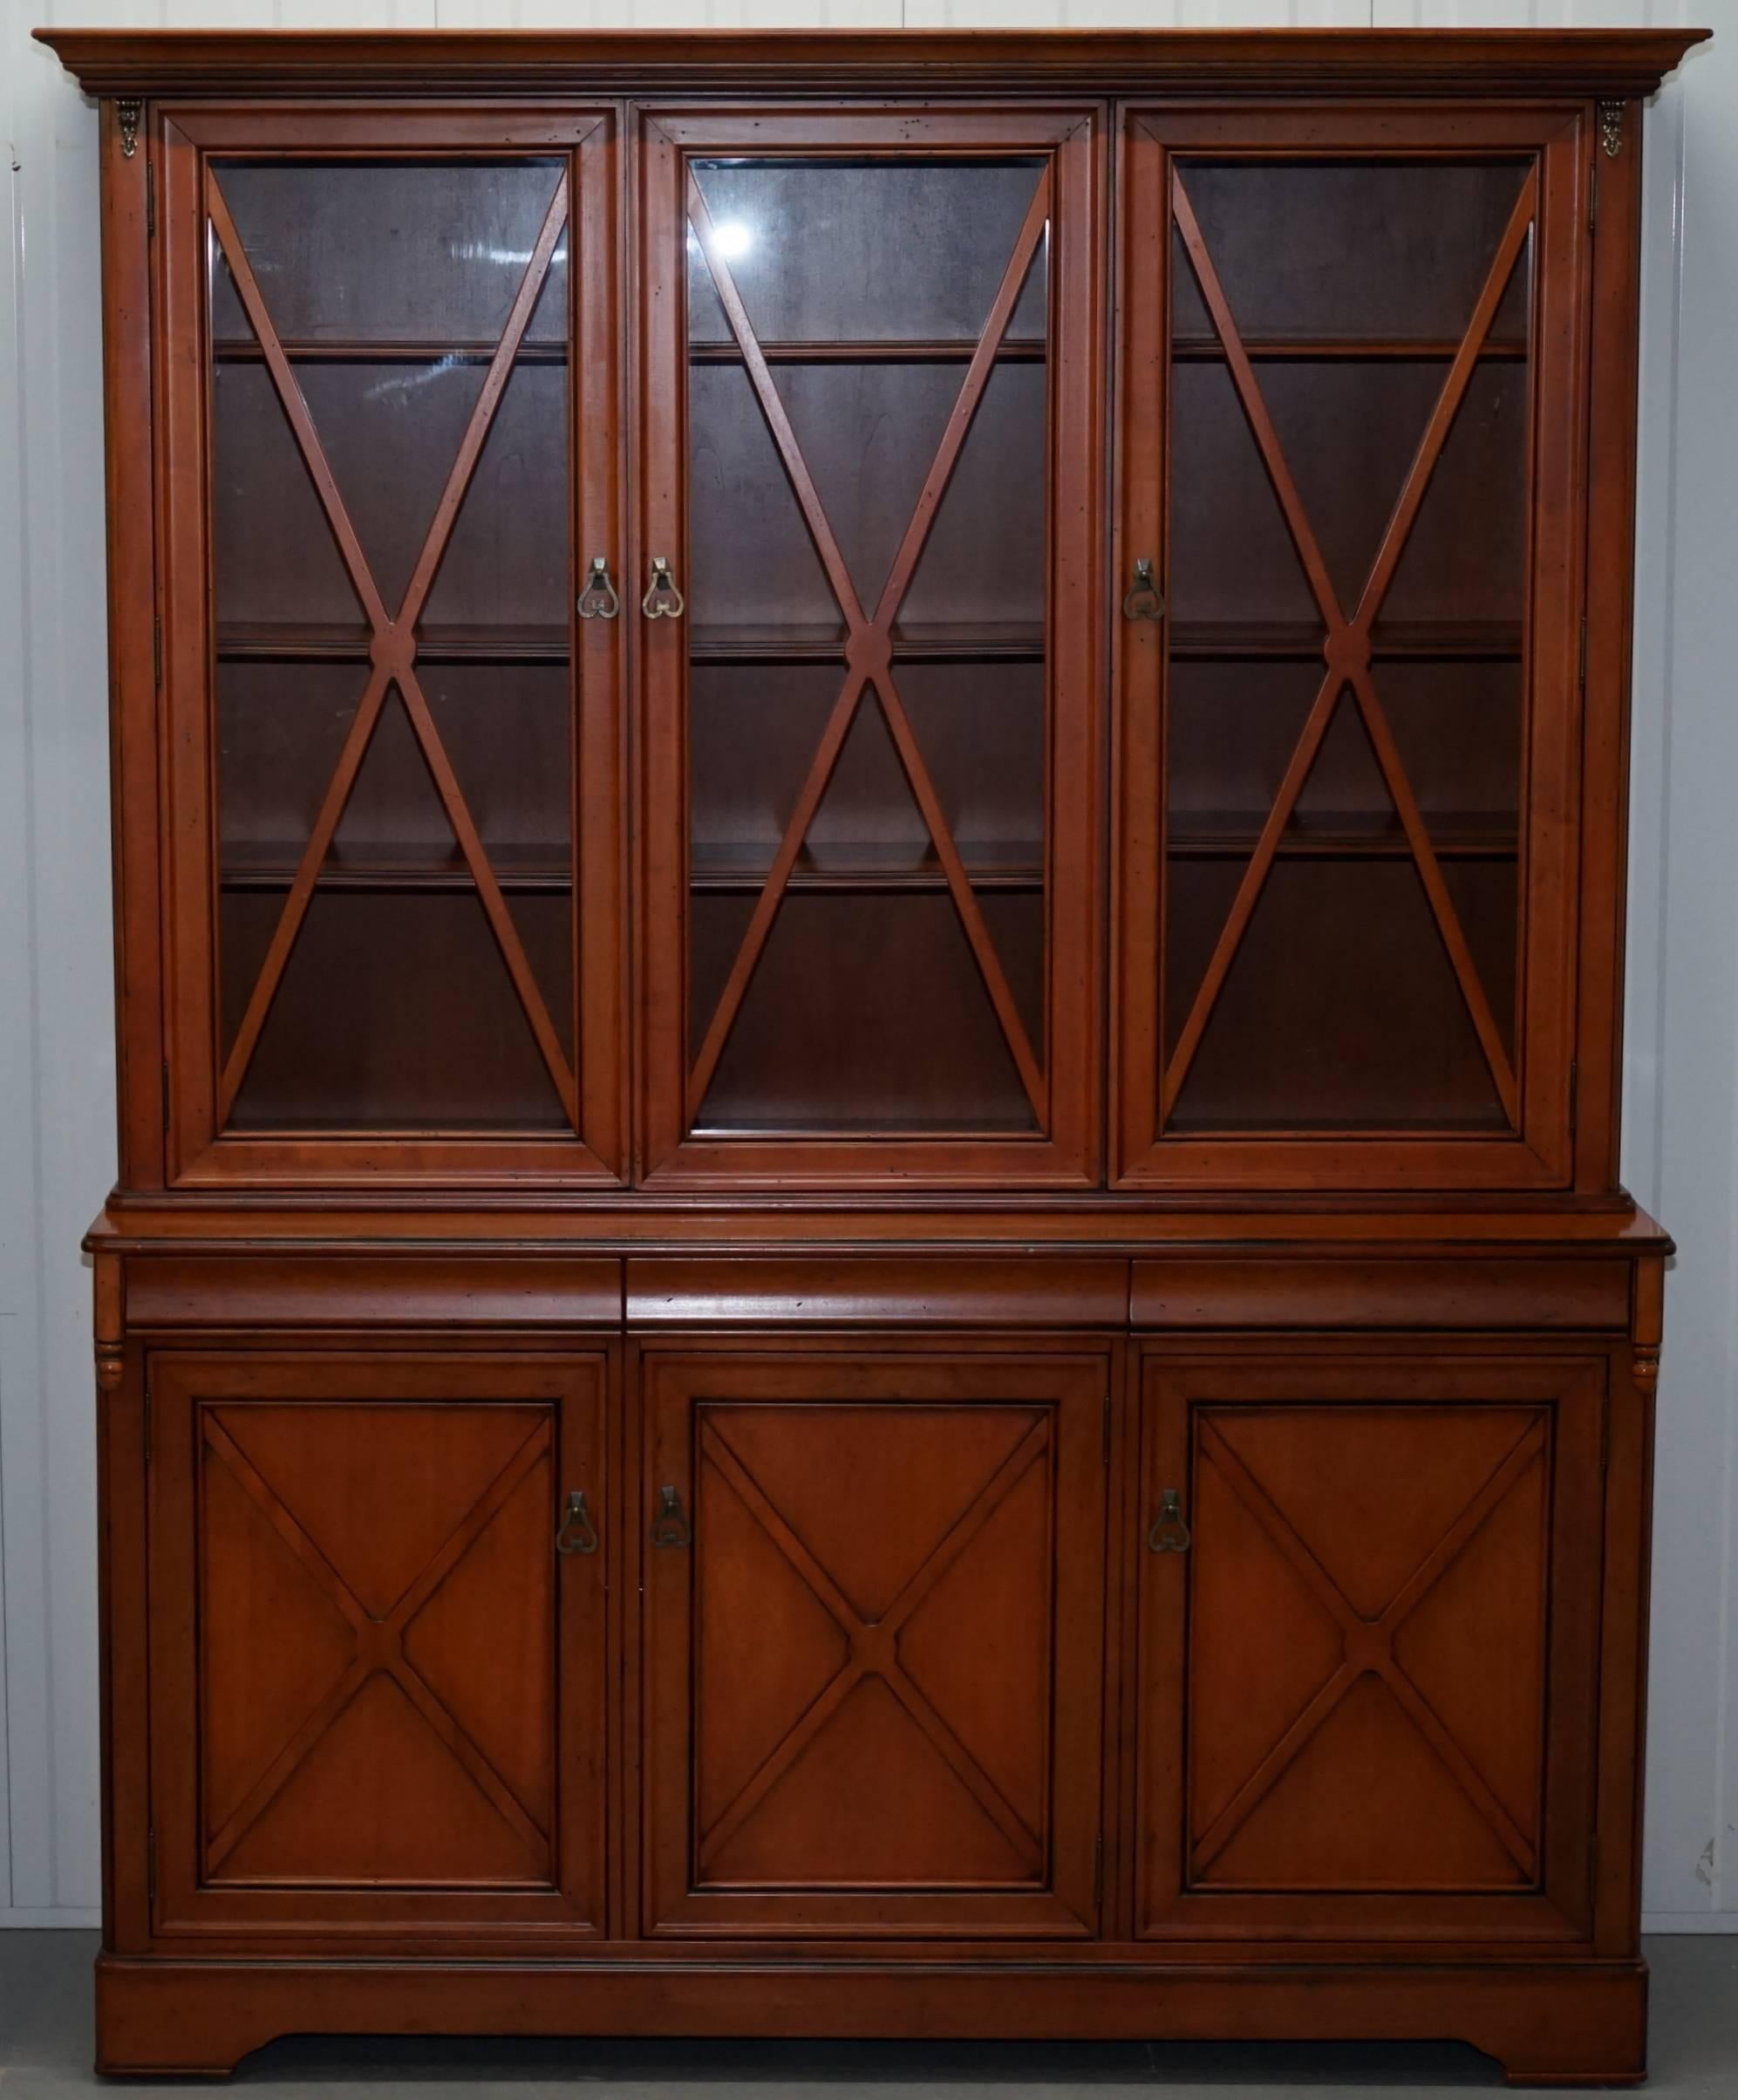 We are delighted to offer for sale this very nice cherry and hardwood welsh dresser display cabinet

A good looking well made and decorative piece with Omalu mounted detailing. We have cleaned waxed and polished it, there is the odd little mark